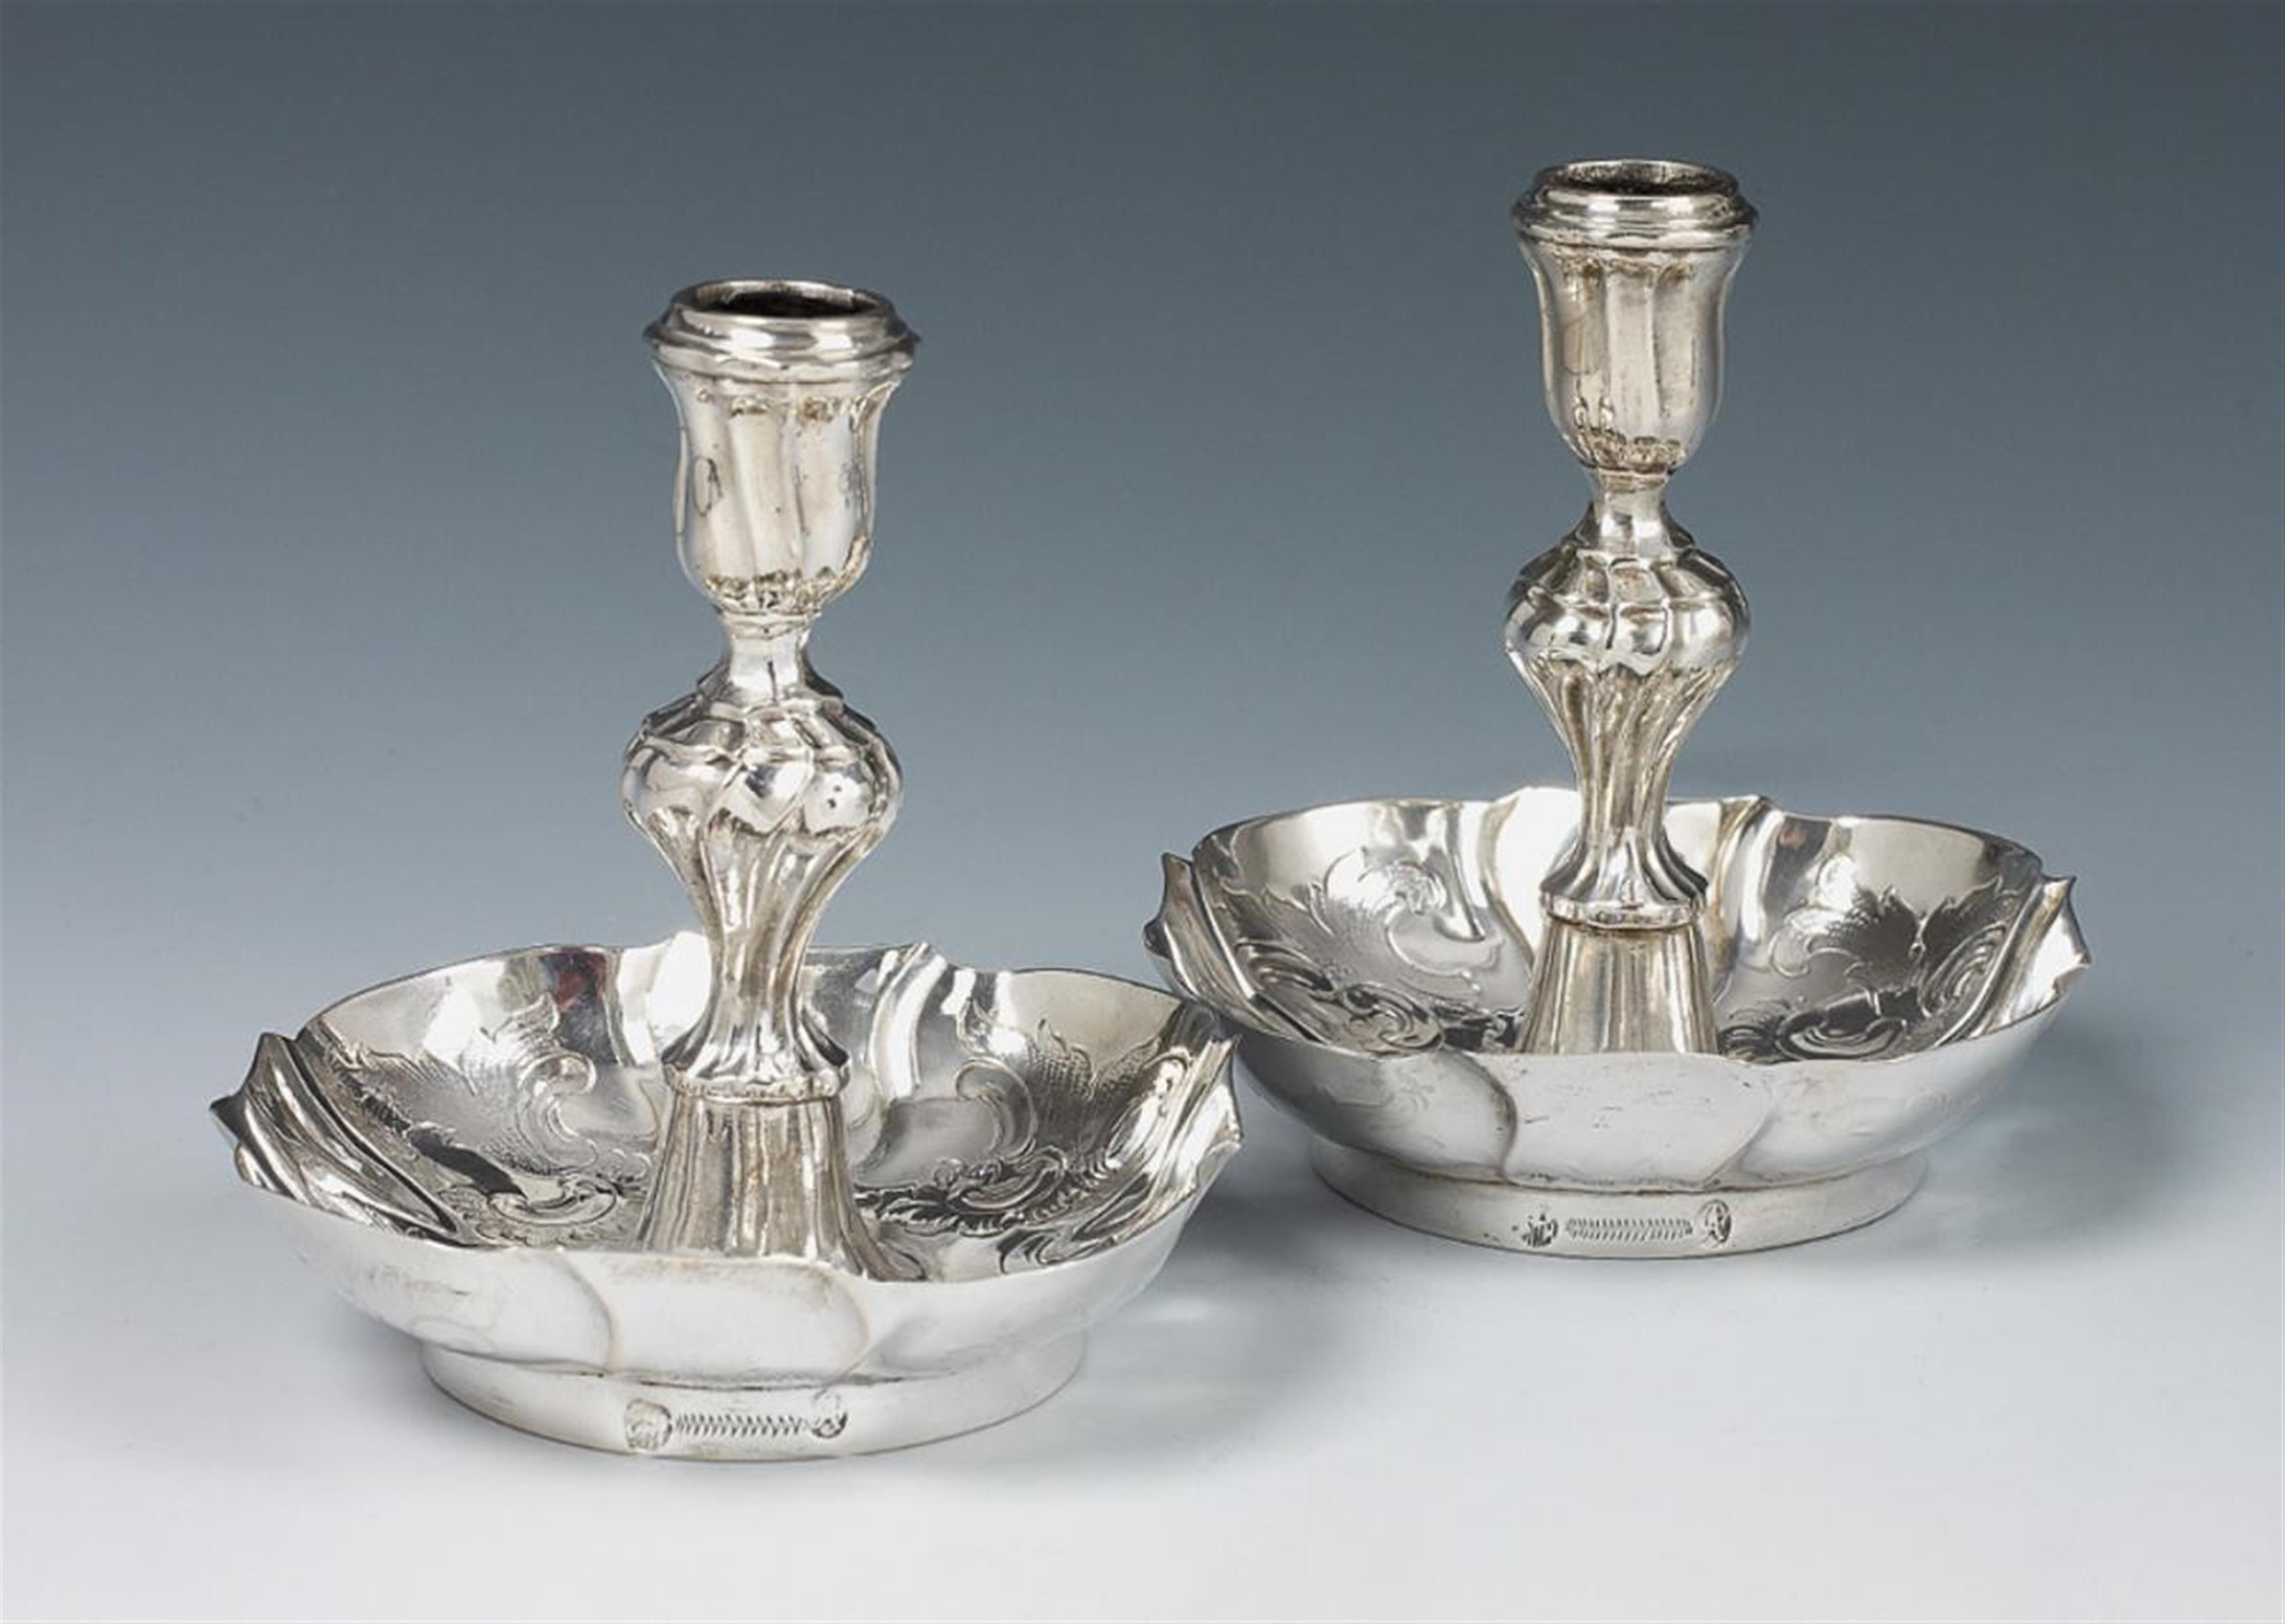 A pair of Gotha silver travel candlesticks. Marks of Andreas Gerbet, ca. 1750 - 60. - image-1